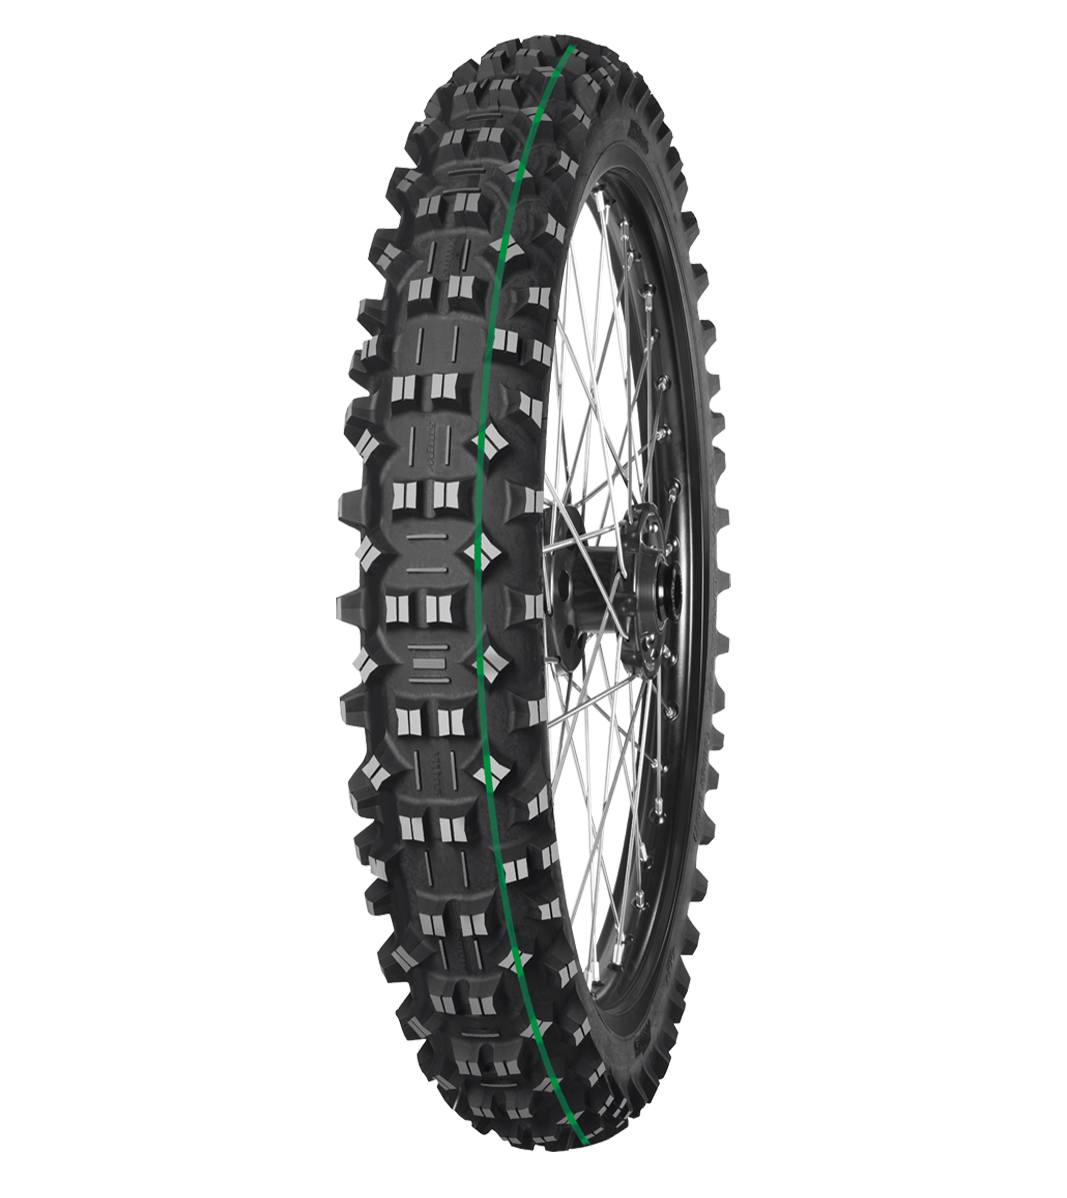 Mitas TERRA FORCE-EF 90/90-21 Enduro Competition Off-Road SUPER LIGHT 54R Green Tube Front Tire, 226748, 90/90-21, Enduro Competition, Front, Off-Road, Terra Force, Terra Force-EF, Trail, Tires - Imported and distributed in North & South America by Lindeco Genuine Powersports - Premier Powersports Equipment and Accessories for Motorcycle Enthusiasts, Professional Riders and Dealers.